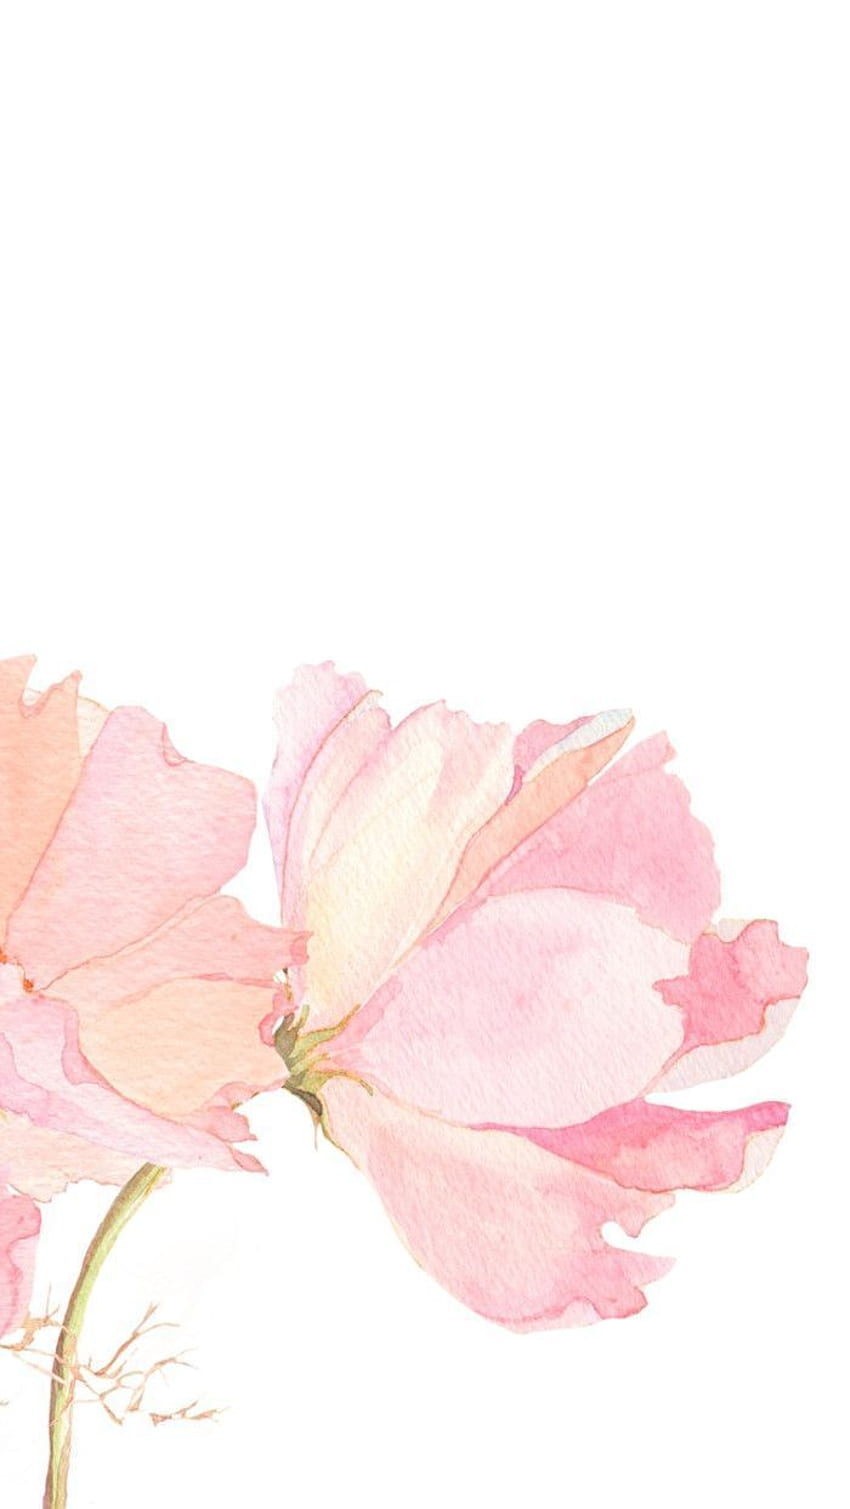 Light Pink Floral iPhone - Top Light Pink Floral iPhone Backgr. Floral iphone background, Flower background , Watercolor floral HD phone wallpaper